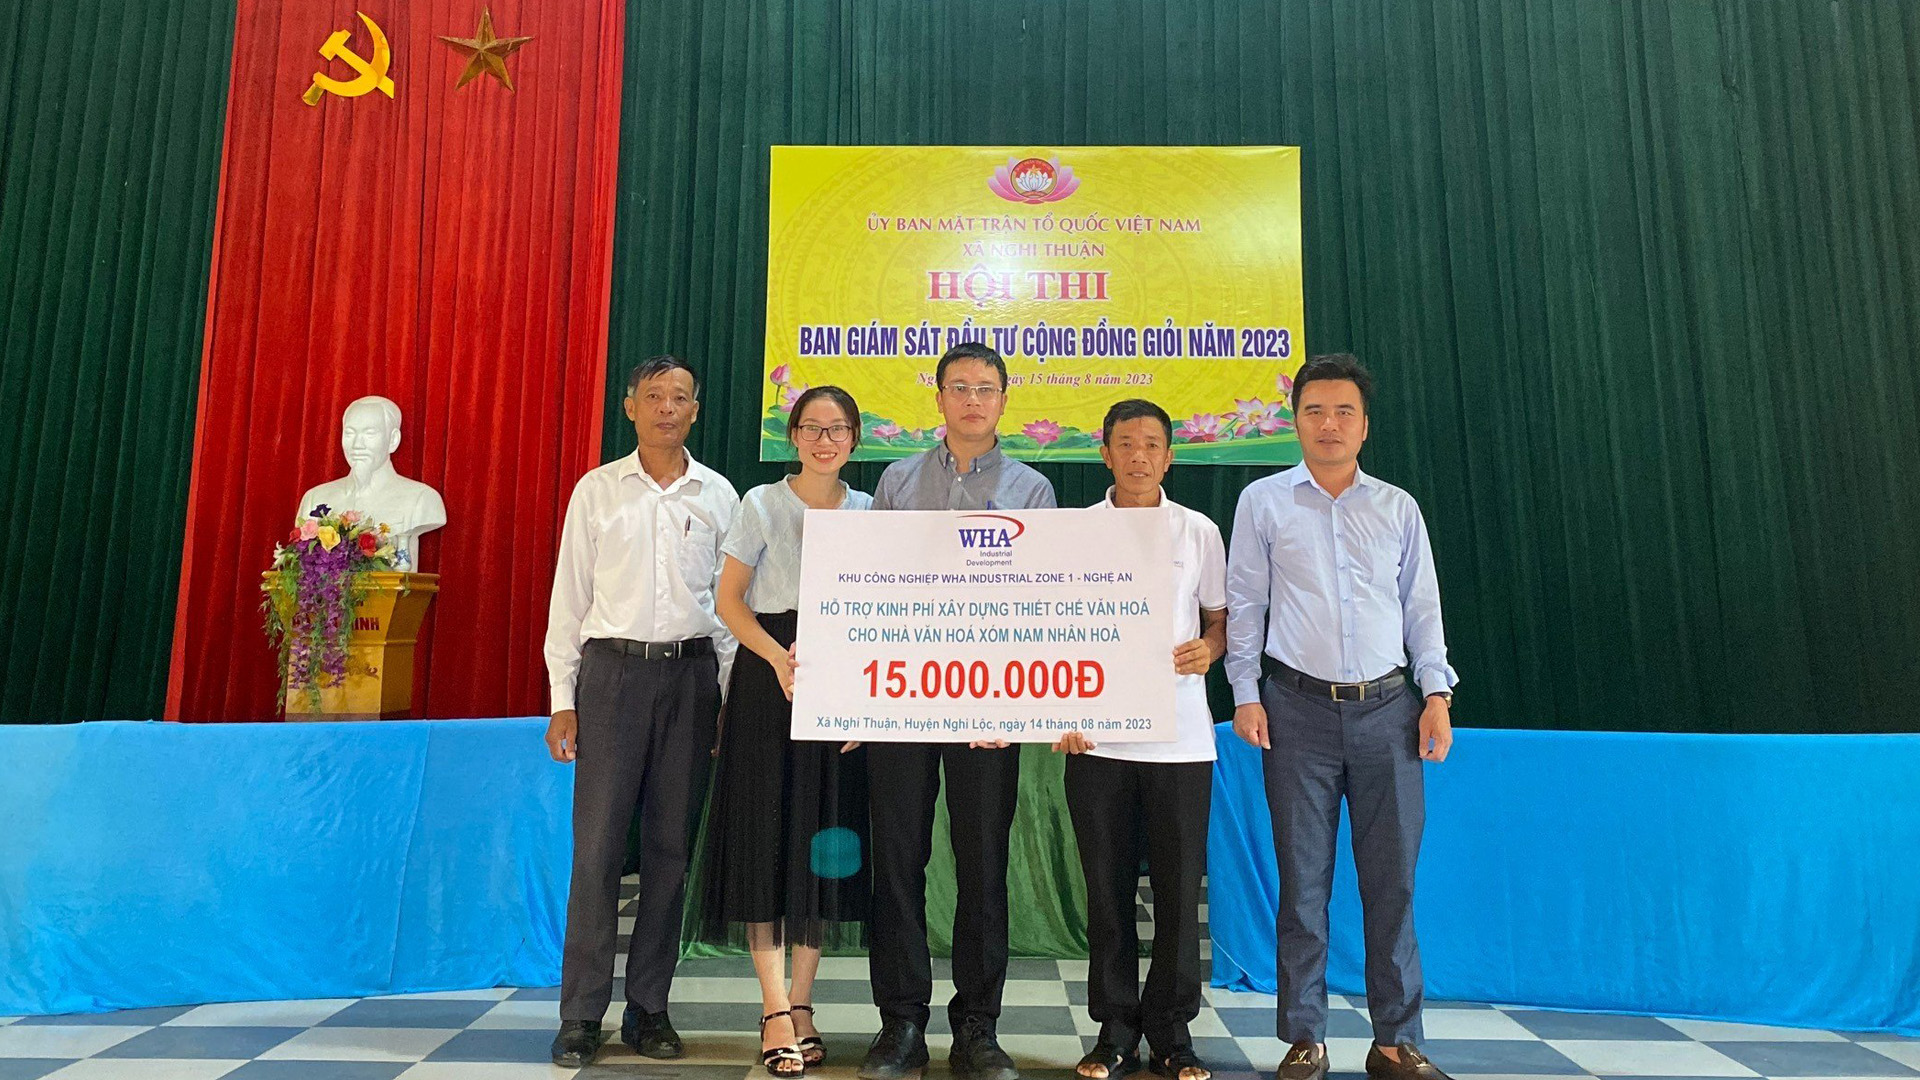 WHA Industrial Zone Nghe An JSC donated around VND 70 million to Khanh Thien, Nam Nhan Hoa, and Bac Nhan Hoa hamlets.